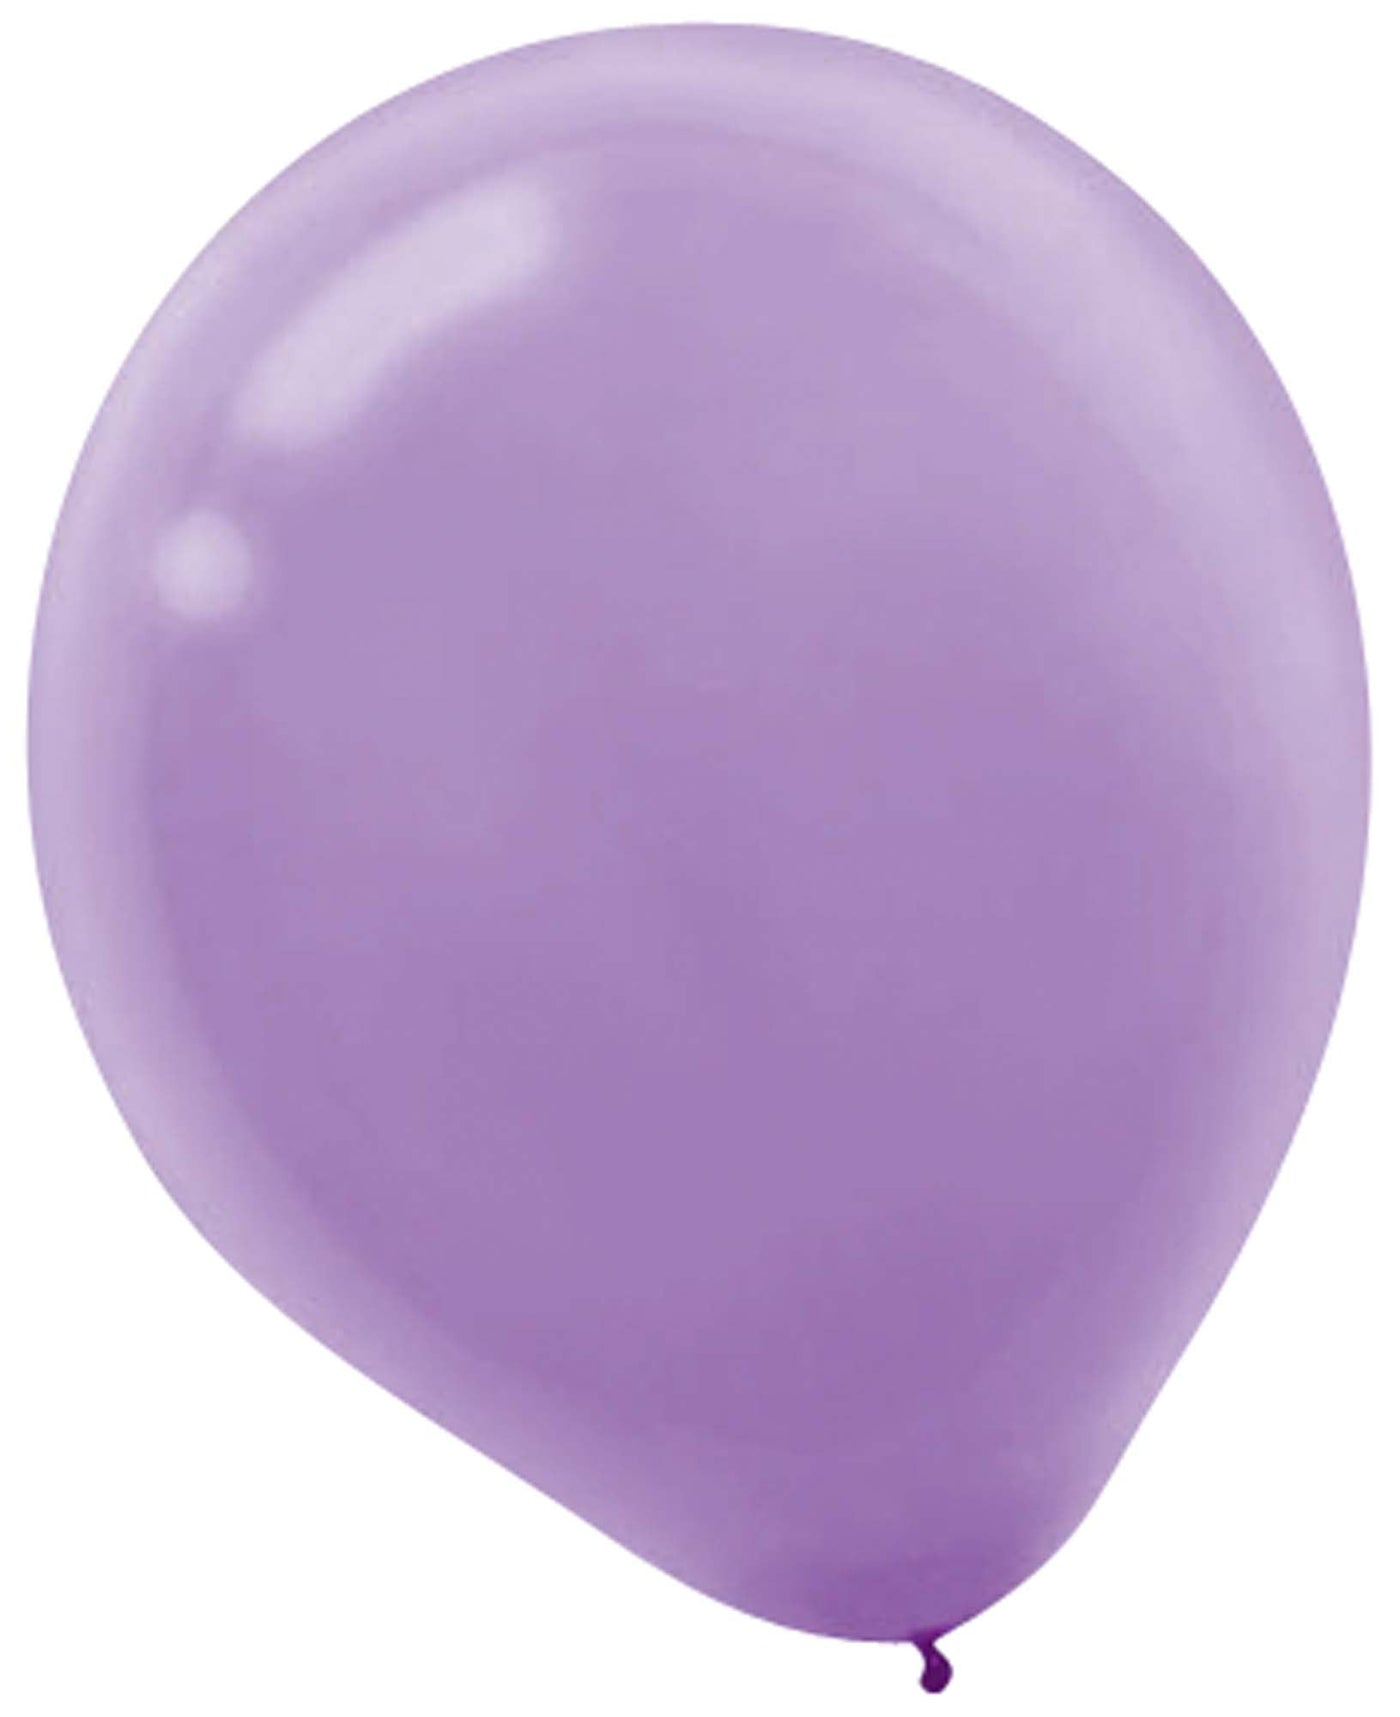 Lavender Latex Balloons 100ct - JJ's Party House - Custom Frosted Cups and Napkins